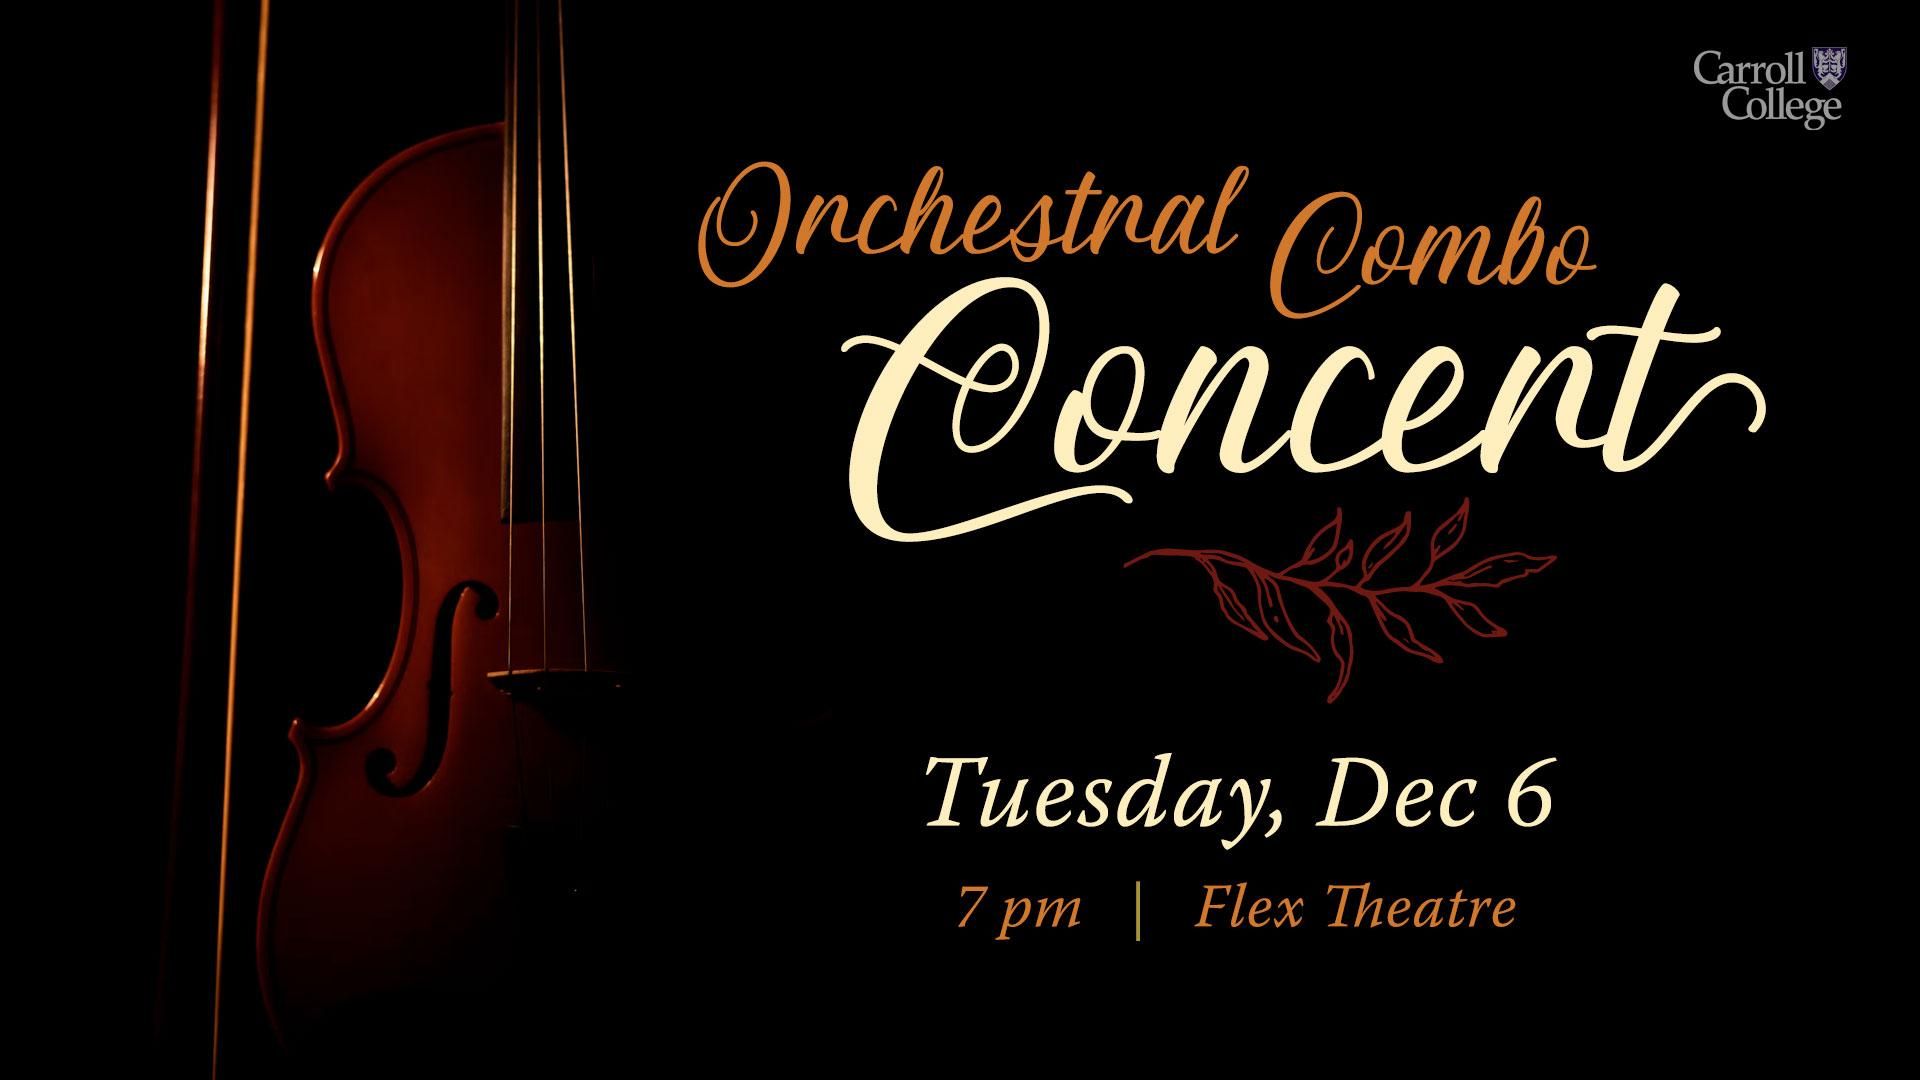 orchestral combo concert graphic